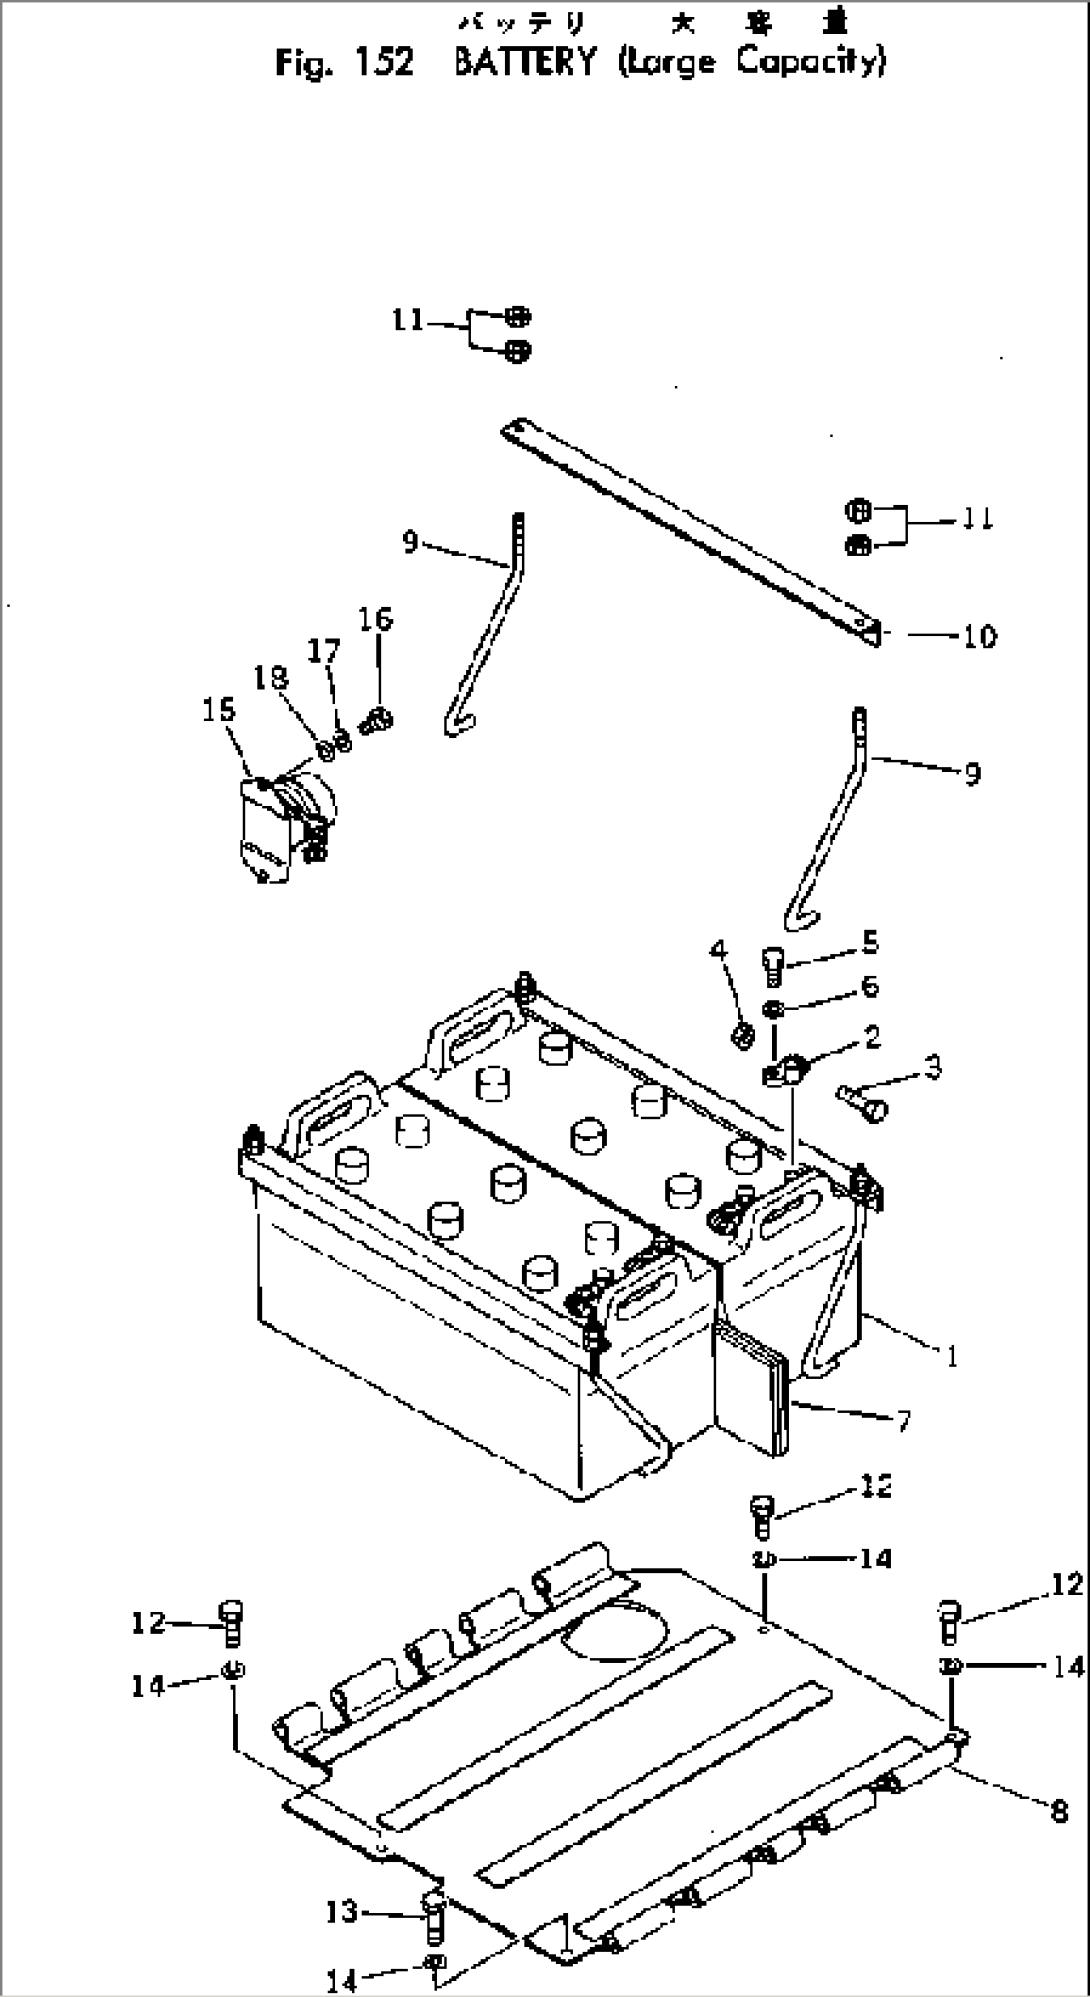 BATTERY AND SWITCH (LARGE CAPACITY)